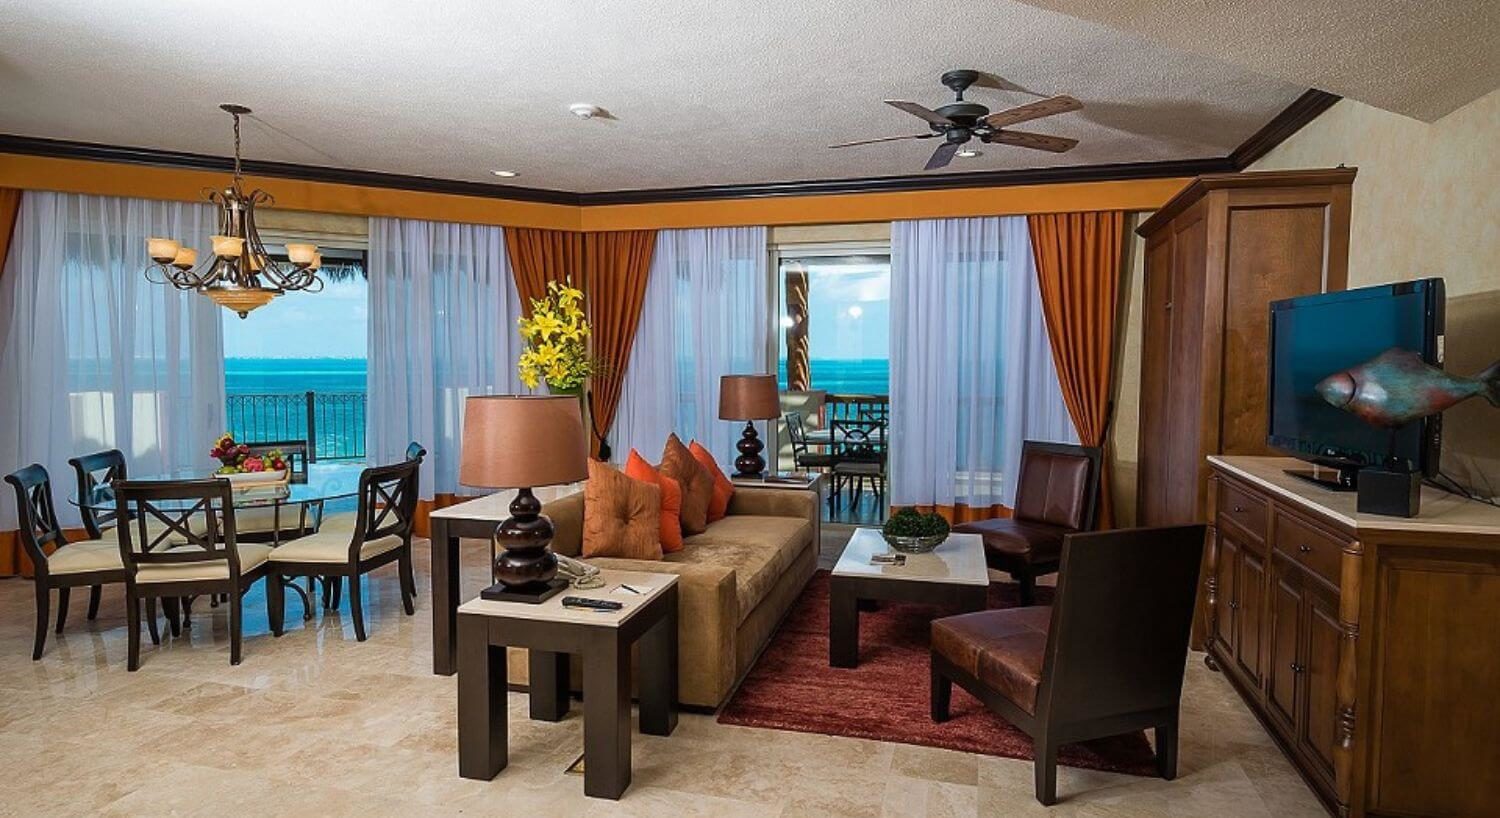 A comfortable living room with a plush sofa, two leather chairs, a marble coffee table and end tables, a hutch with a flat screen TV, a tall murphy bed, and dining area with a round glass table and several dining chairs. Sliding doors on two sides lead out to a wrap around terrace outdoor furniture and sweeping views of the turquoise Caribbean sea.